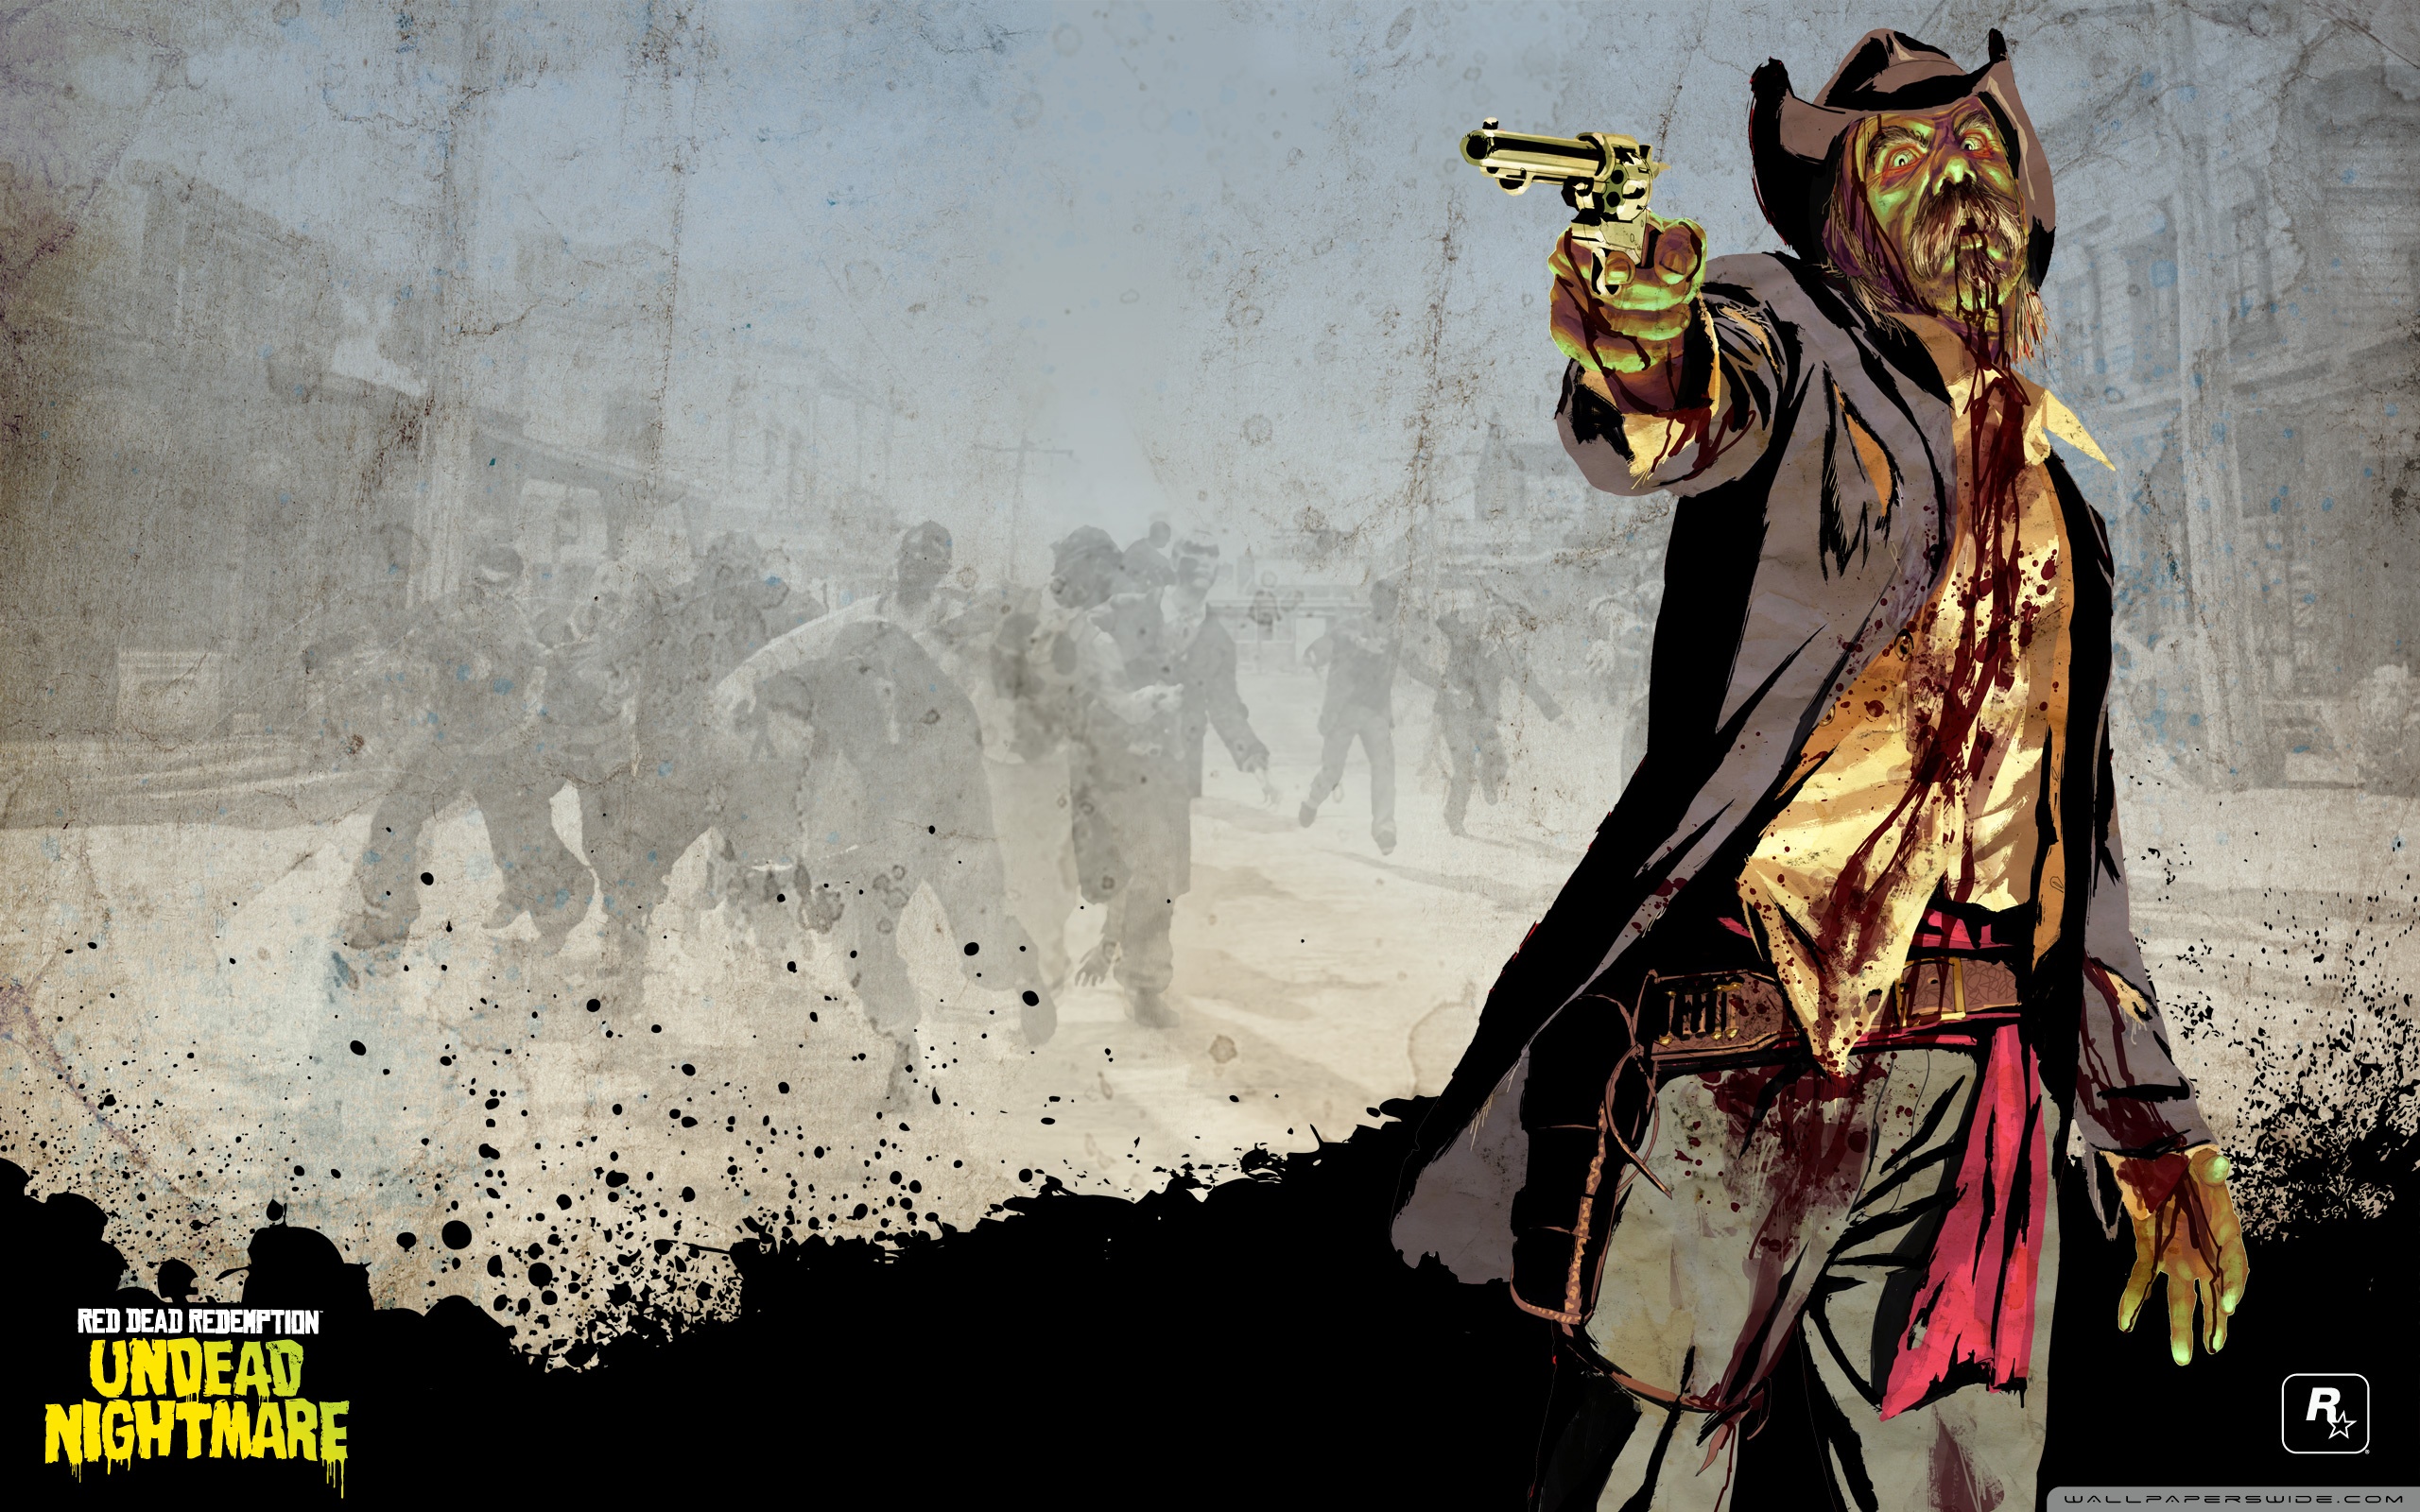 Red Dead Redemption: Undead Nightmare wallpaper, Video Game, HQ Red